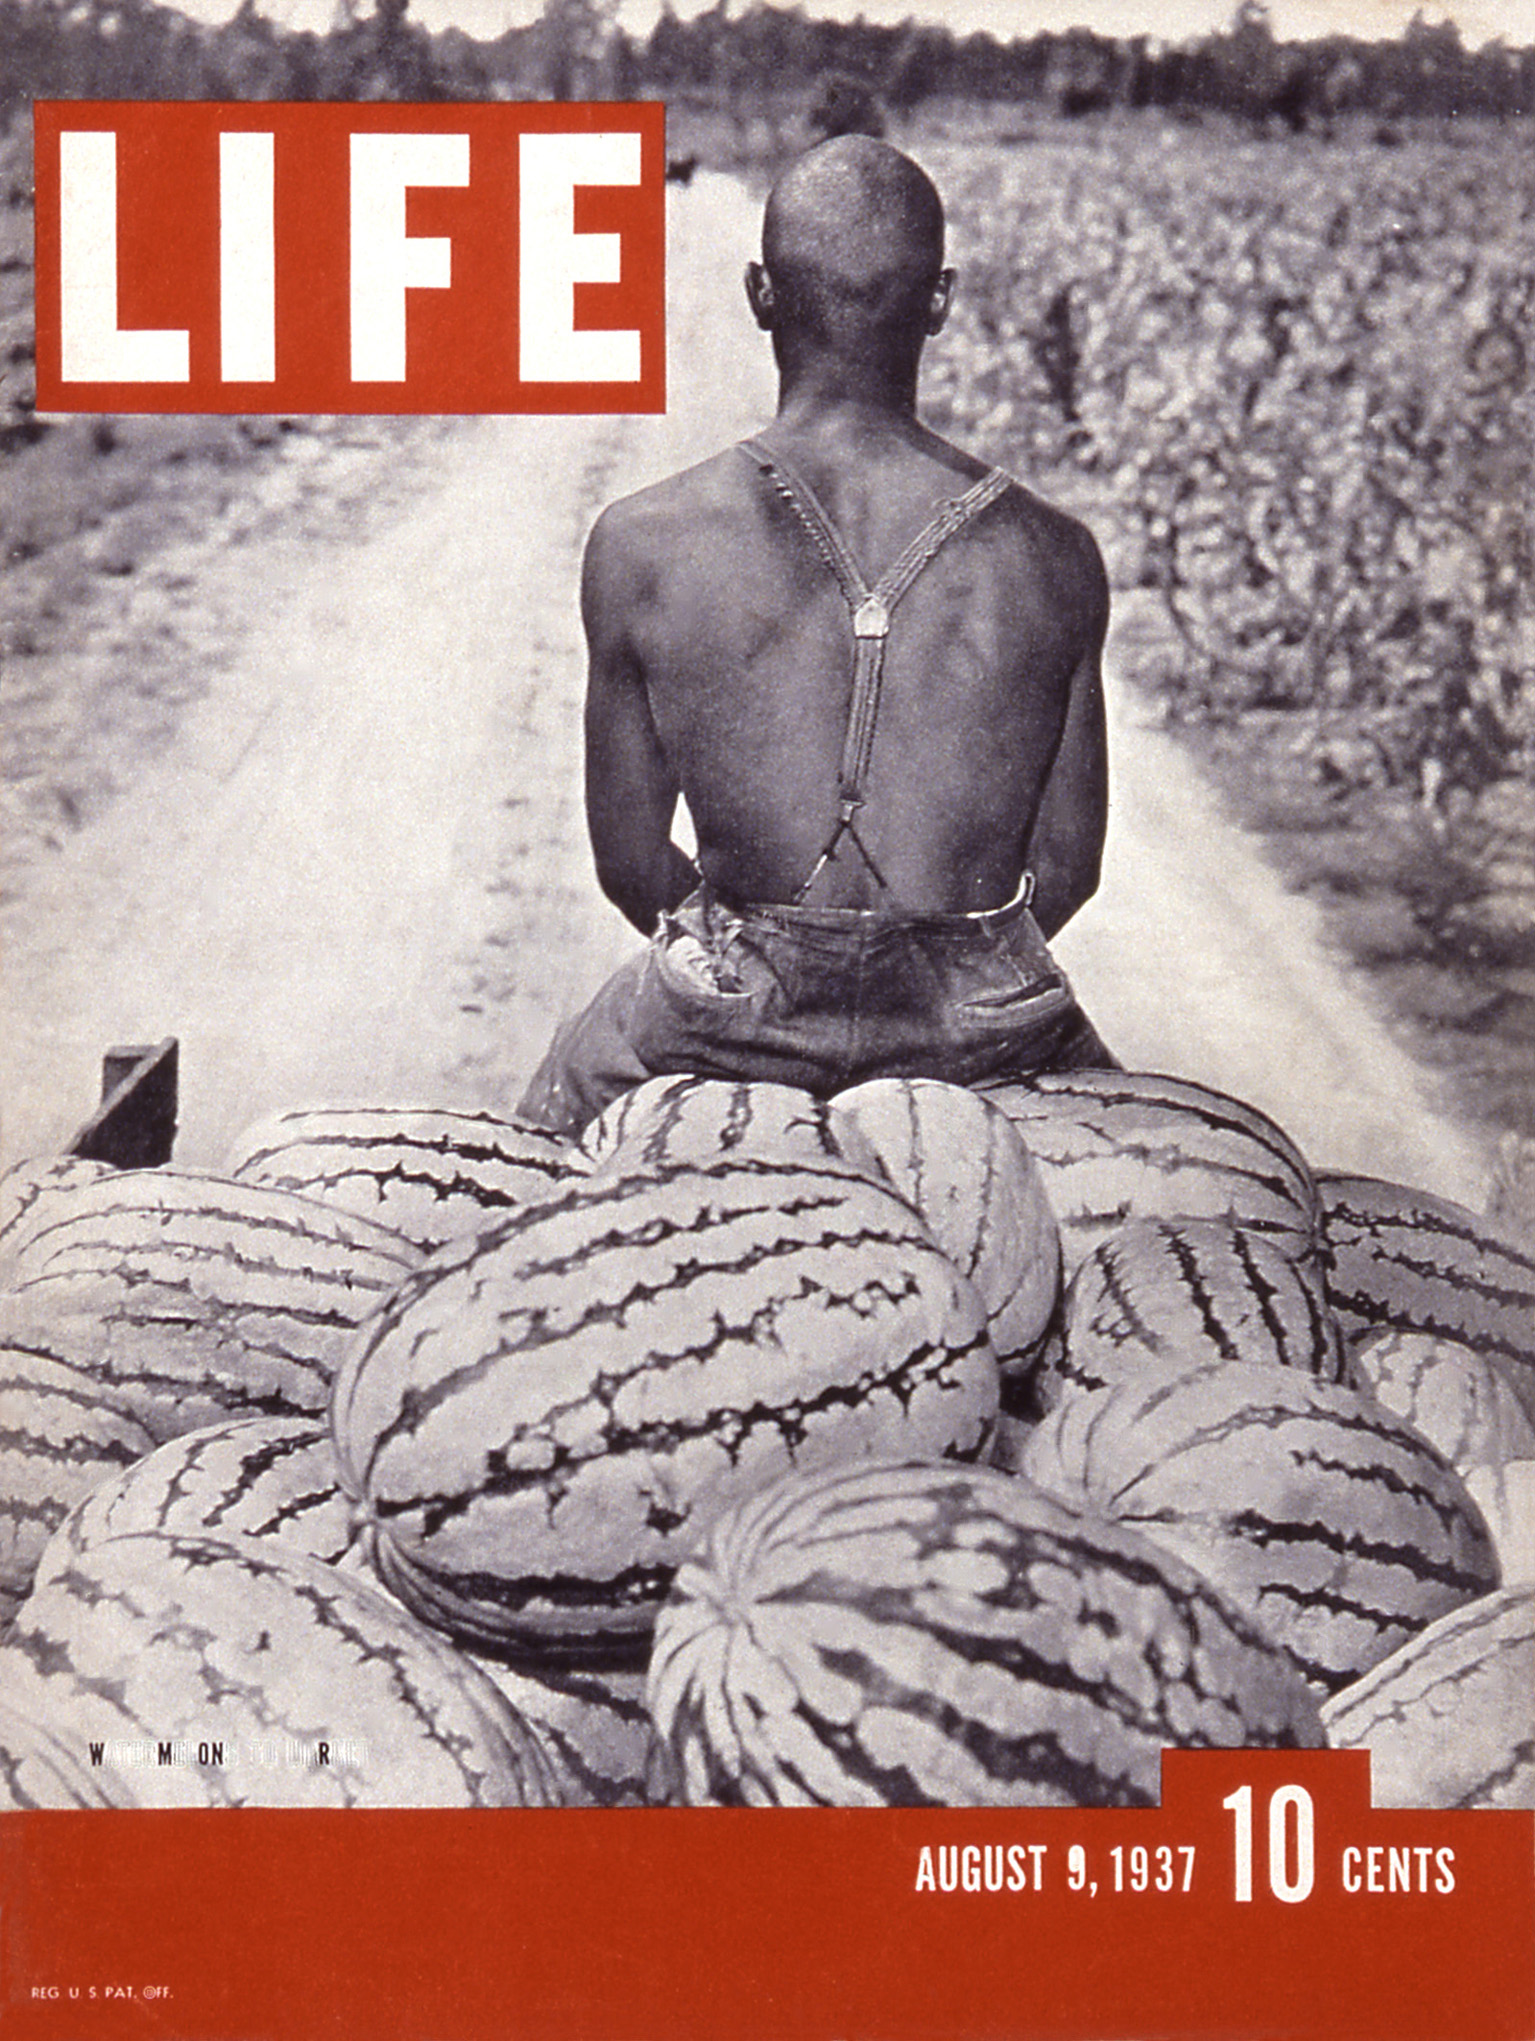 LIFE (August 9, 1937)